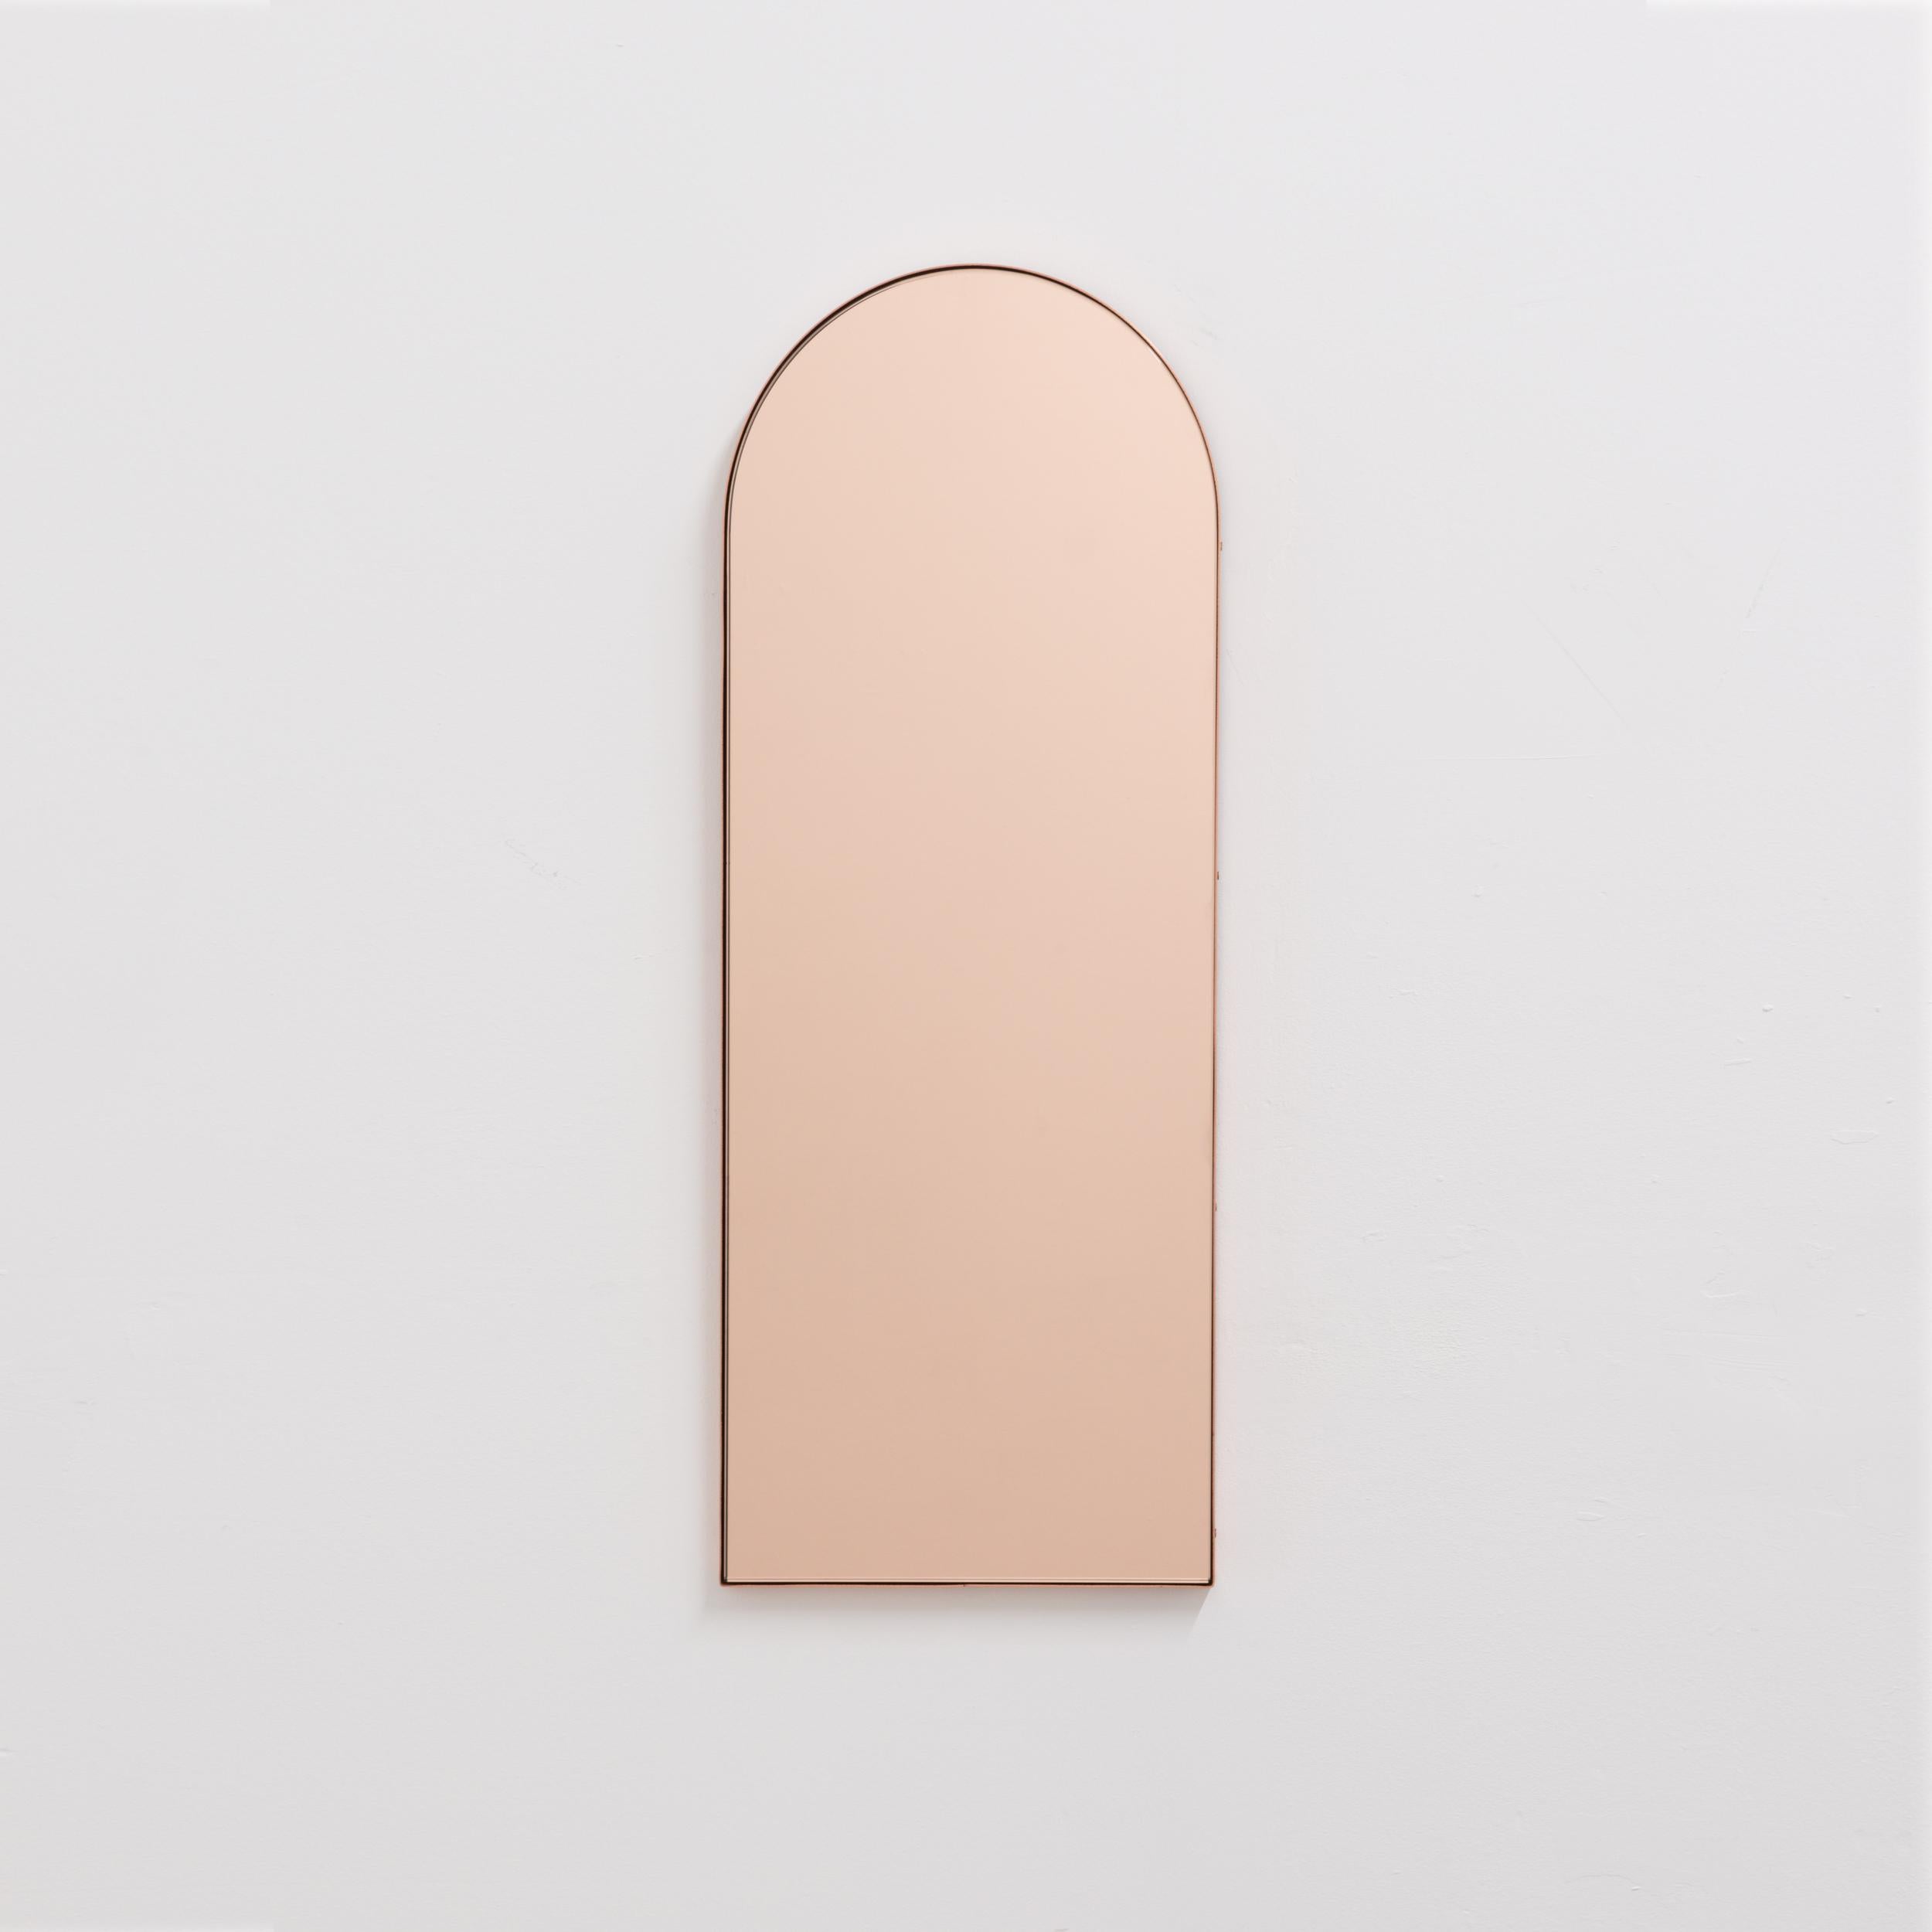 rose gold arch mirror